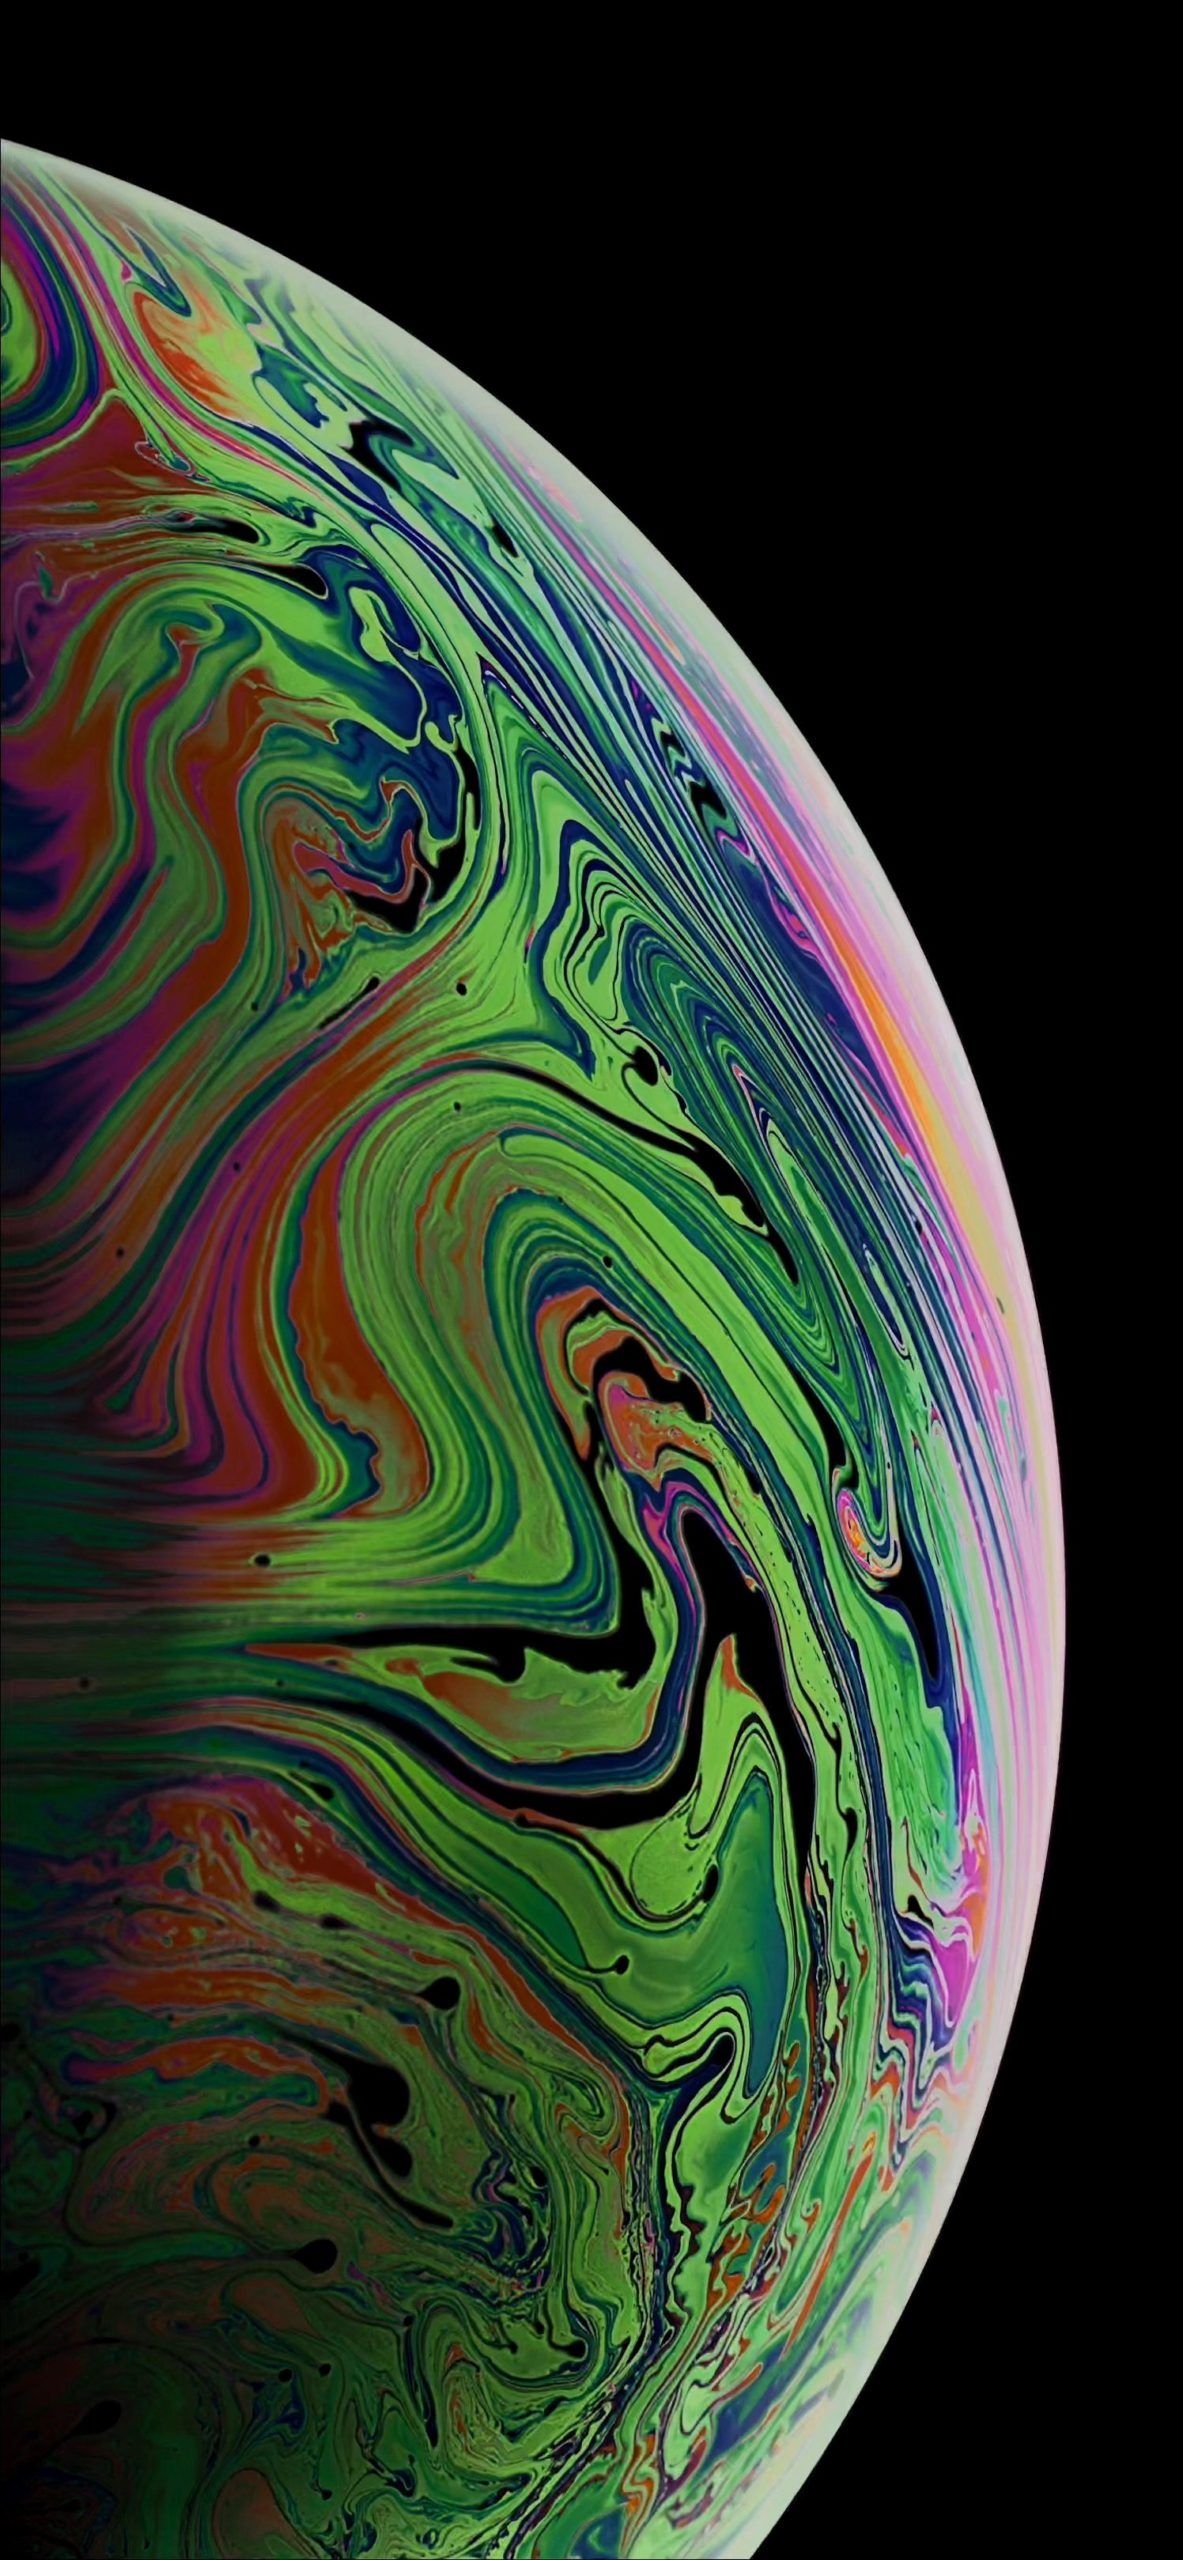 iPhone Xs Max Wallpaper Download In 4K Gallery July 2021